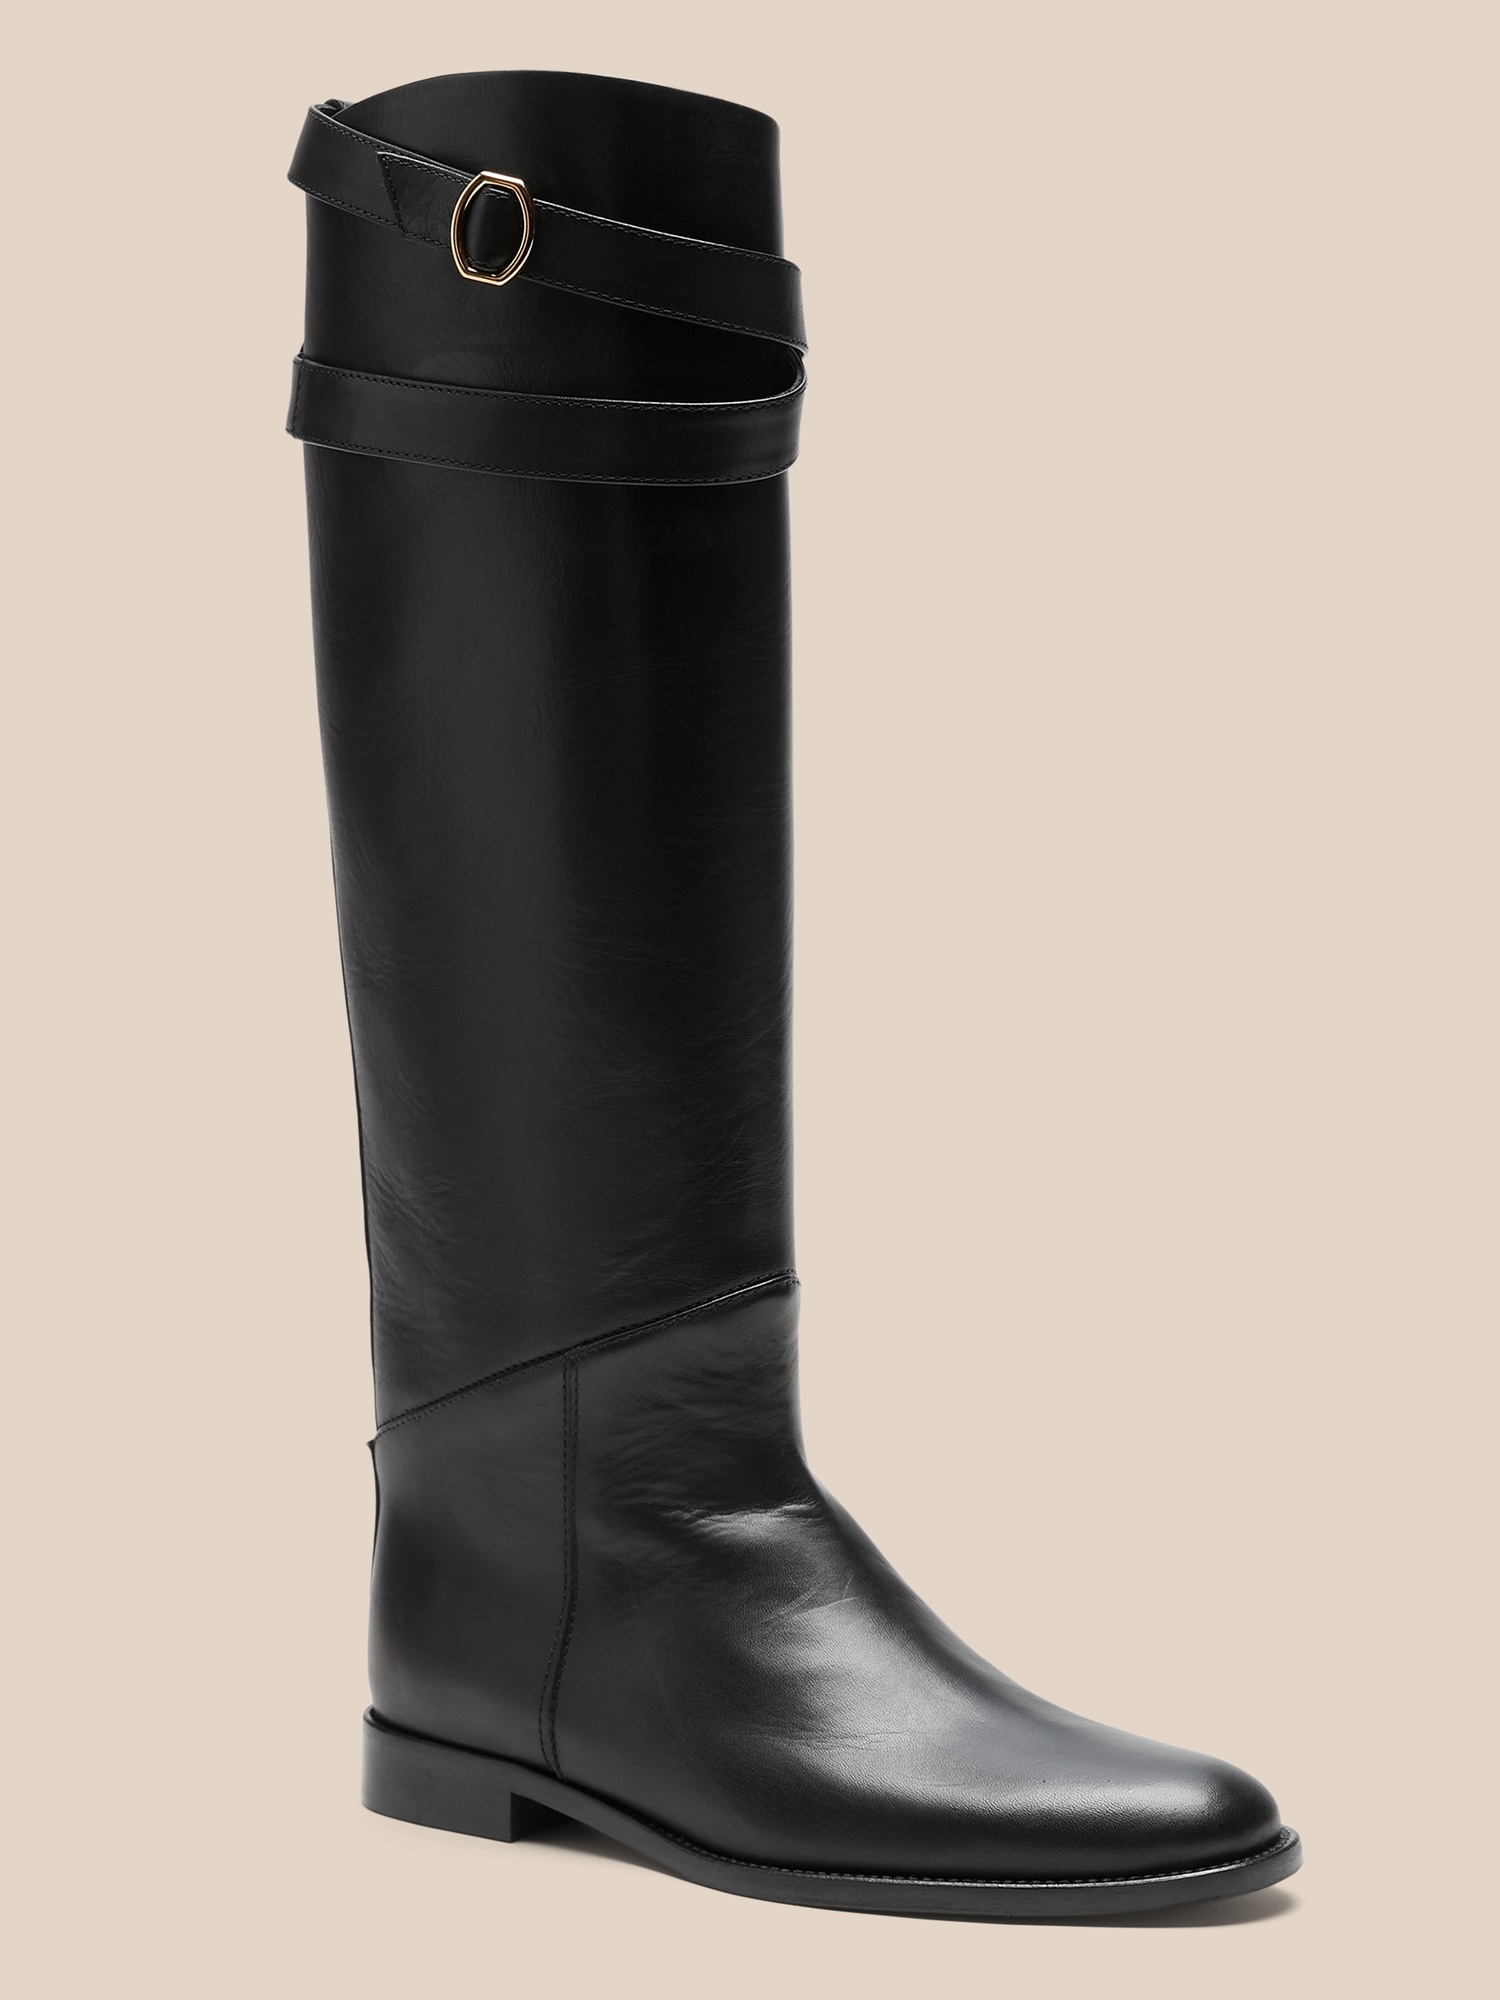 Cheval Leather Riding Boot | Banana Republic